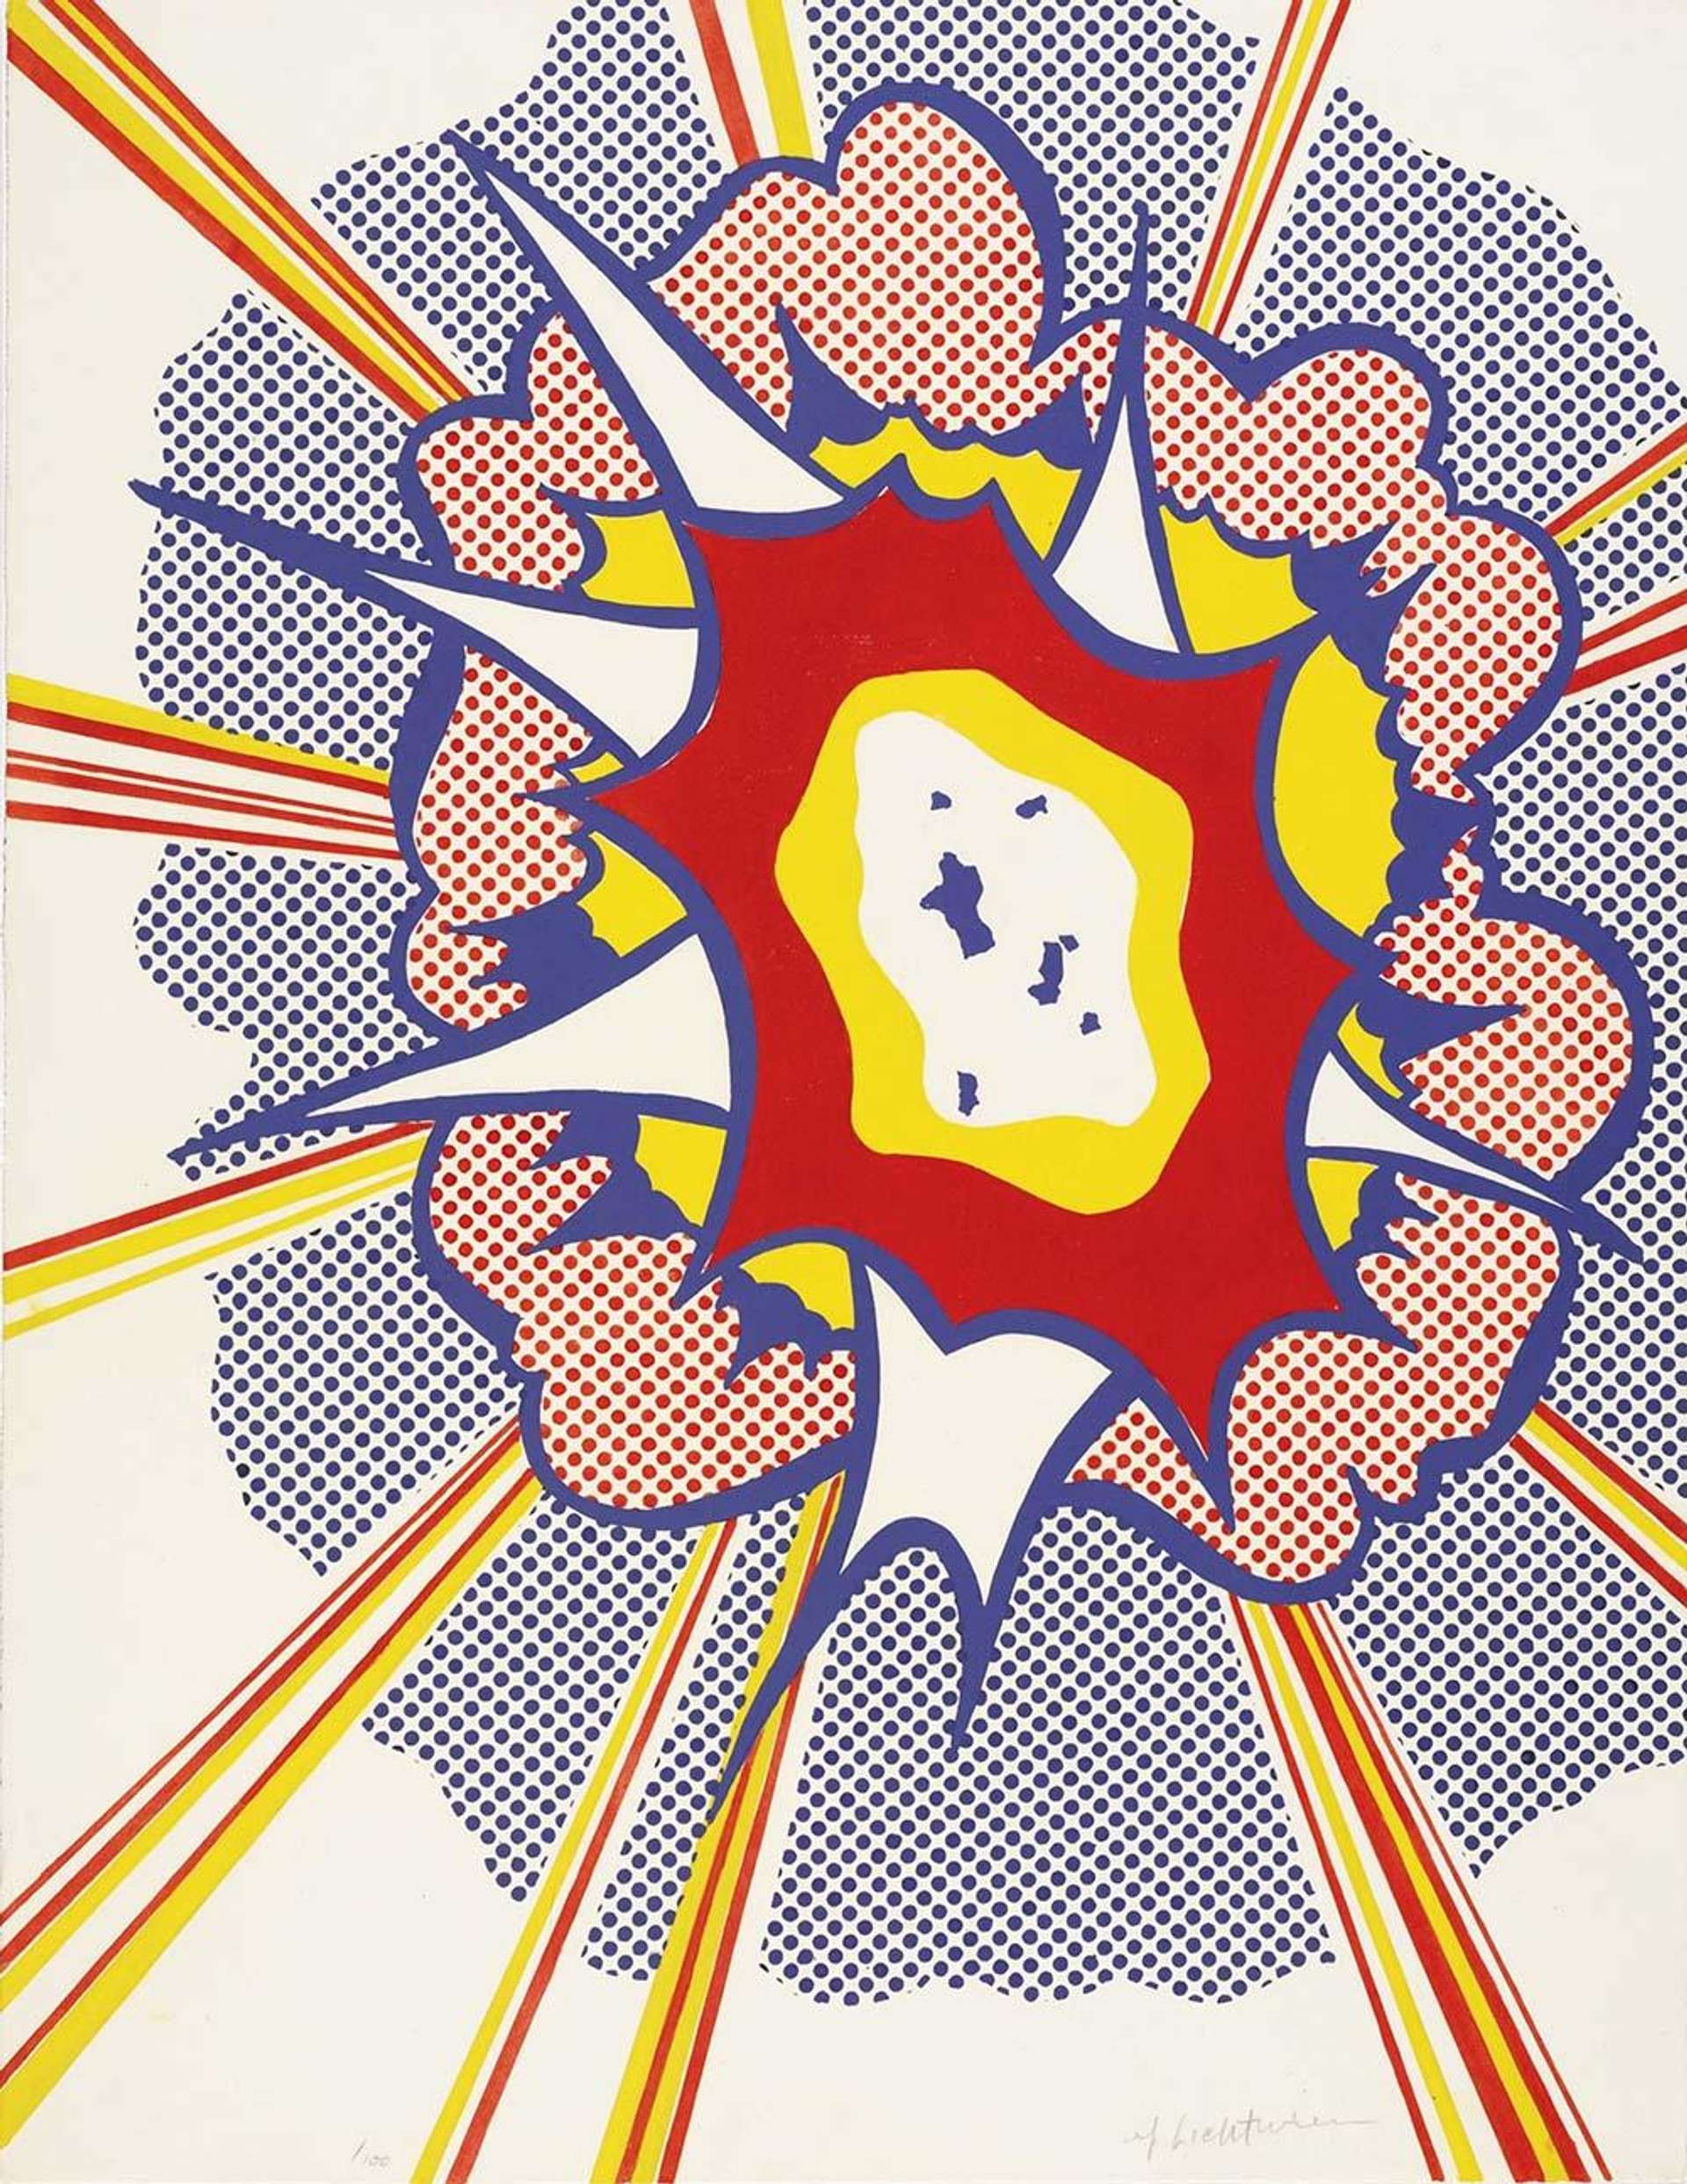 An image of the print Explosion by Roy Lichtenstein. It shows a comic-book style explosion in red, blue and yellow, featuring Ben-Day dots.